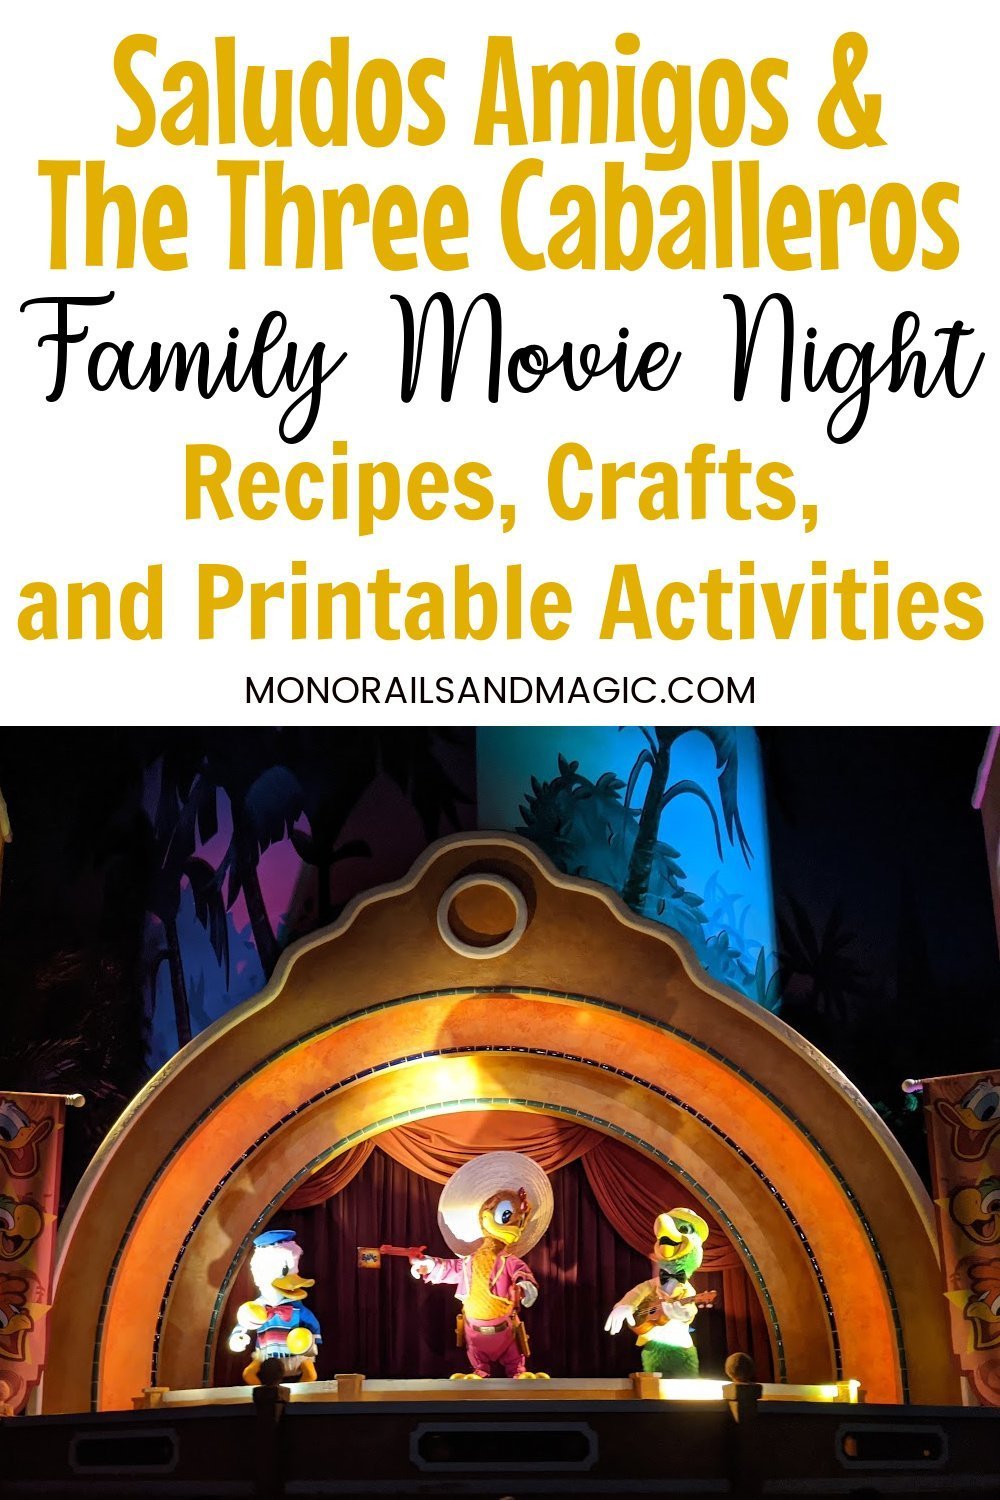 Family movie night recipes, crafts, and printables for Saludos Amigos and The Three Caballeros.